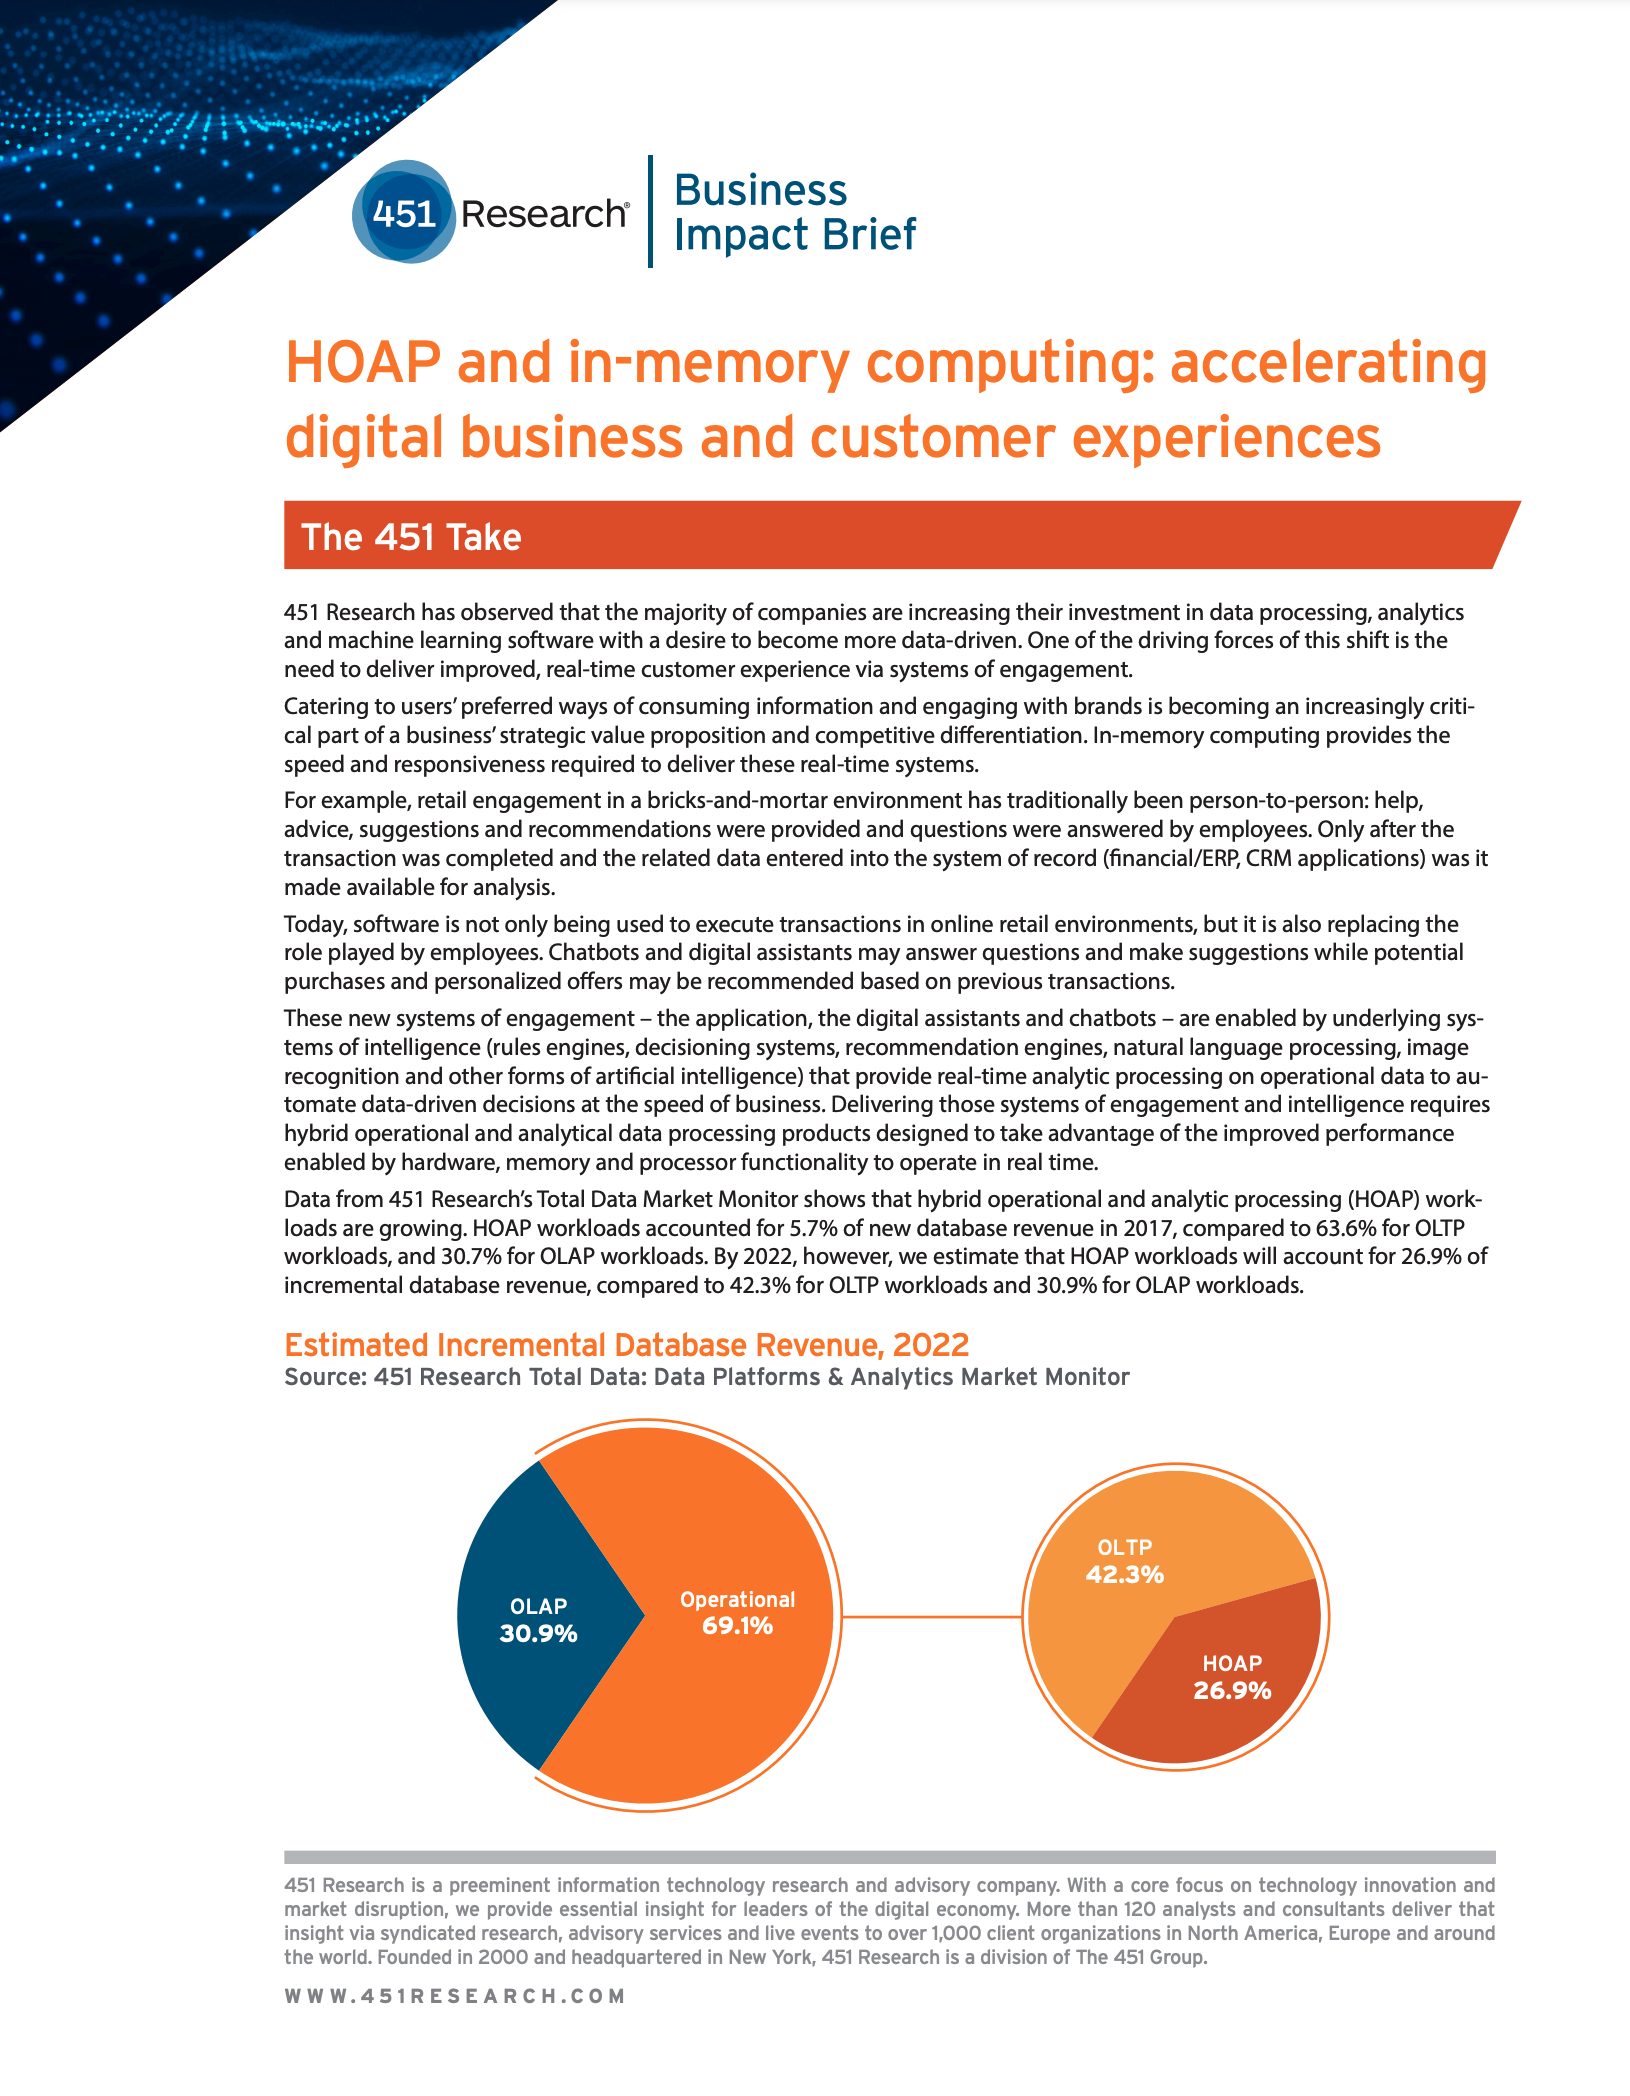 451 Research: HOAP and in-memory computing: accelerating digital business and customer experiences